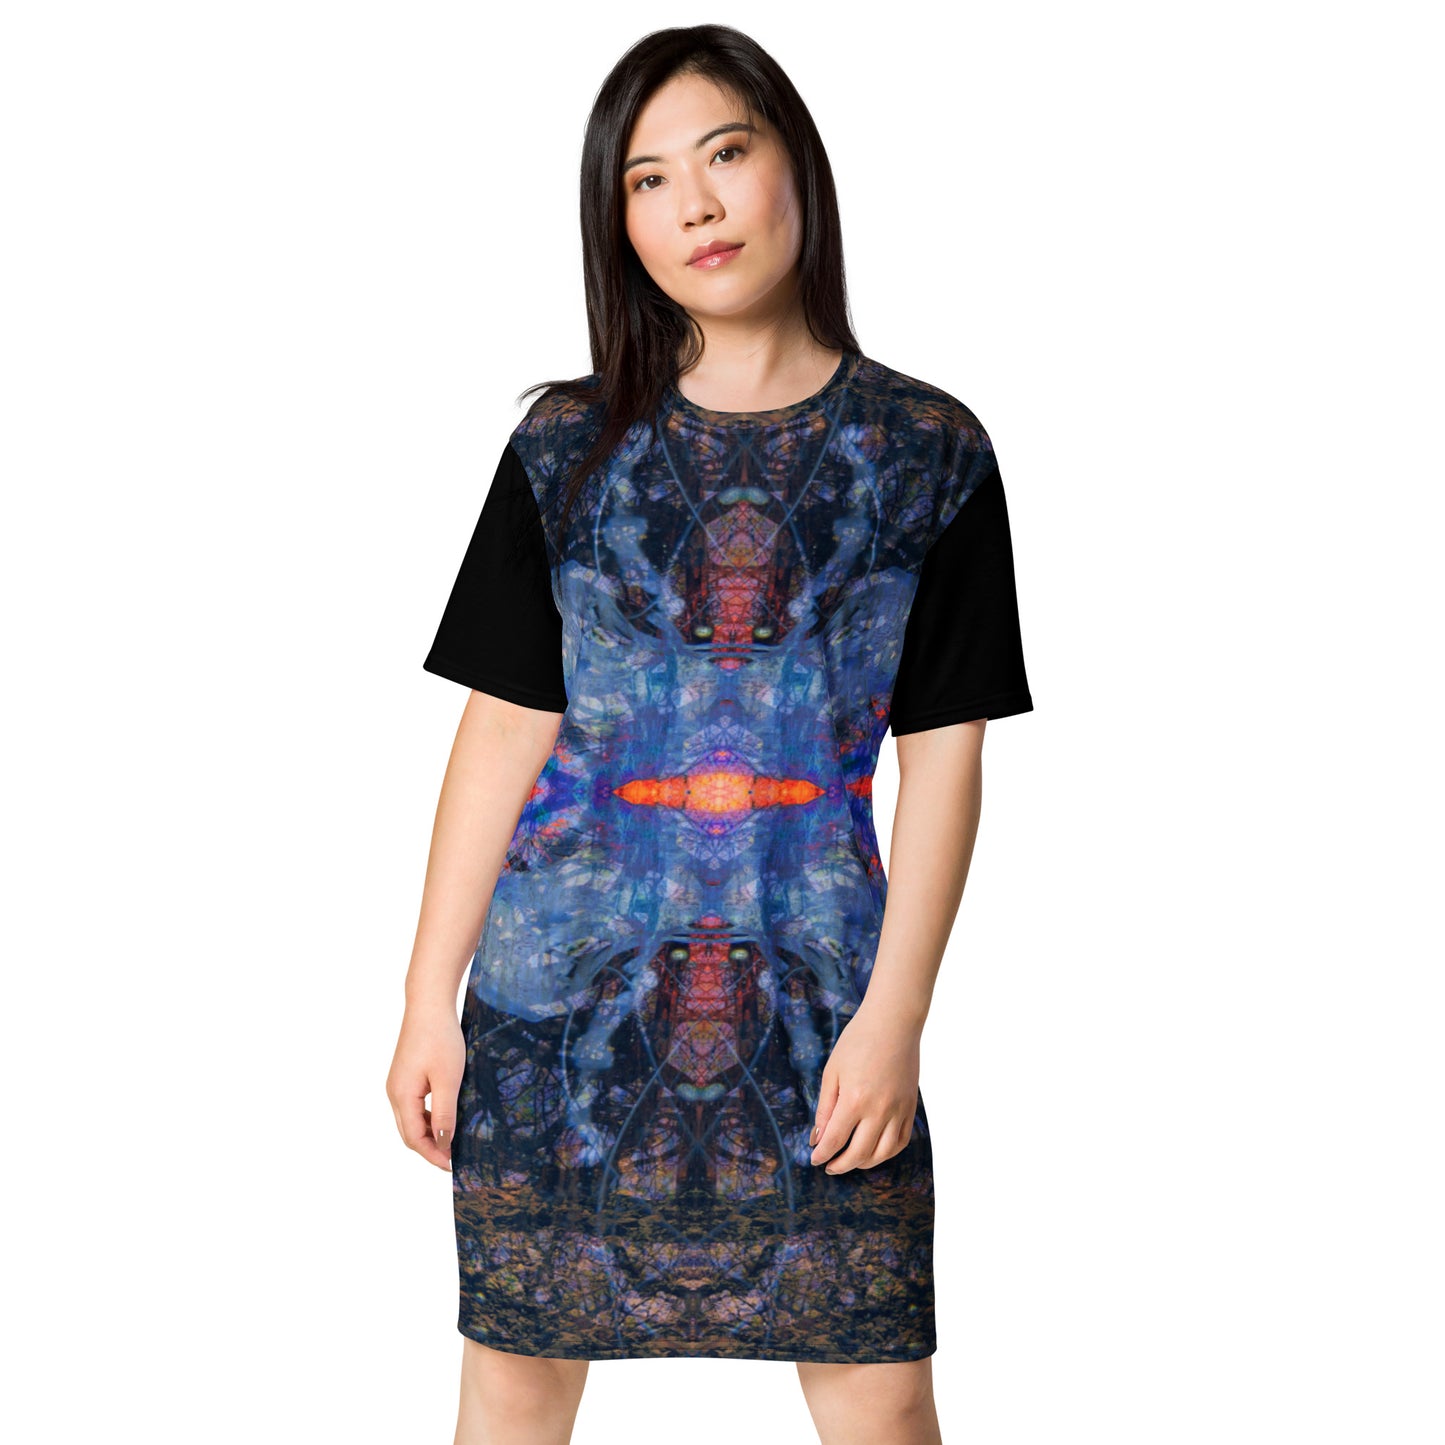 Abstractions T-shirt dress